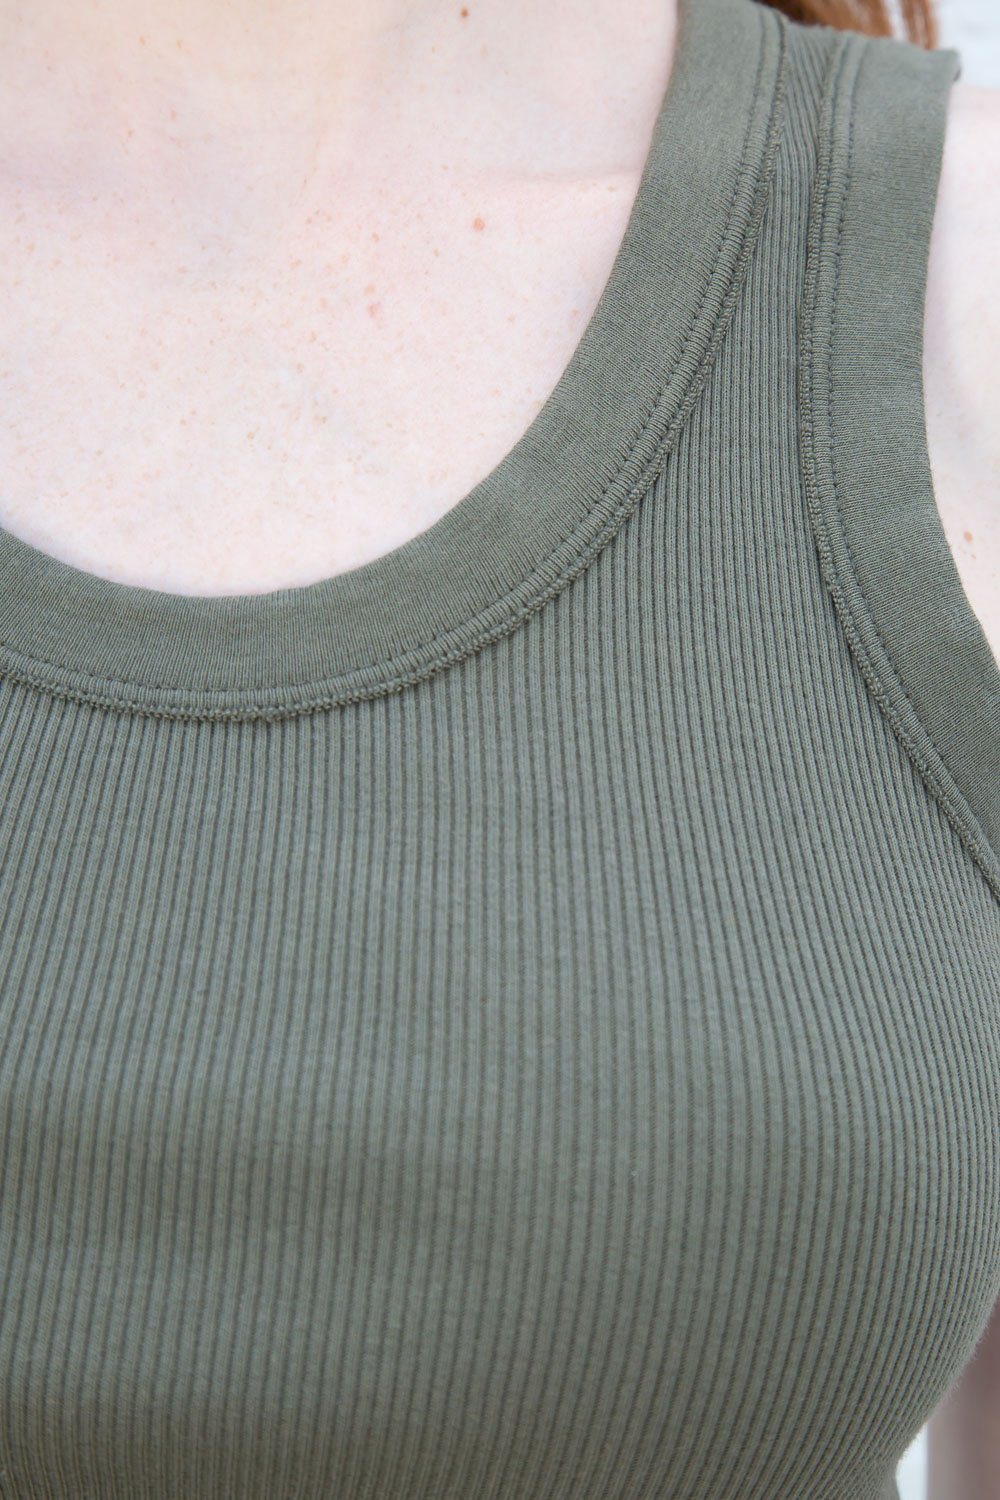 brandy melville sage green connor tank muscle tee style